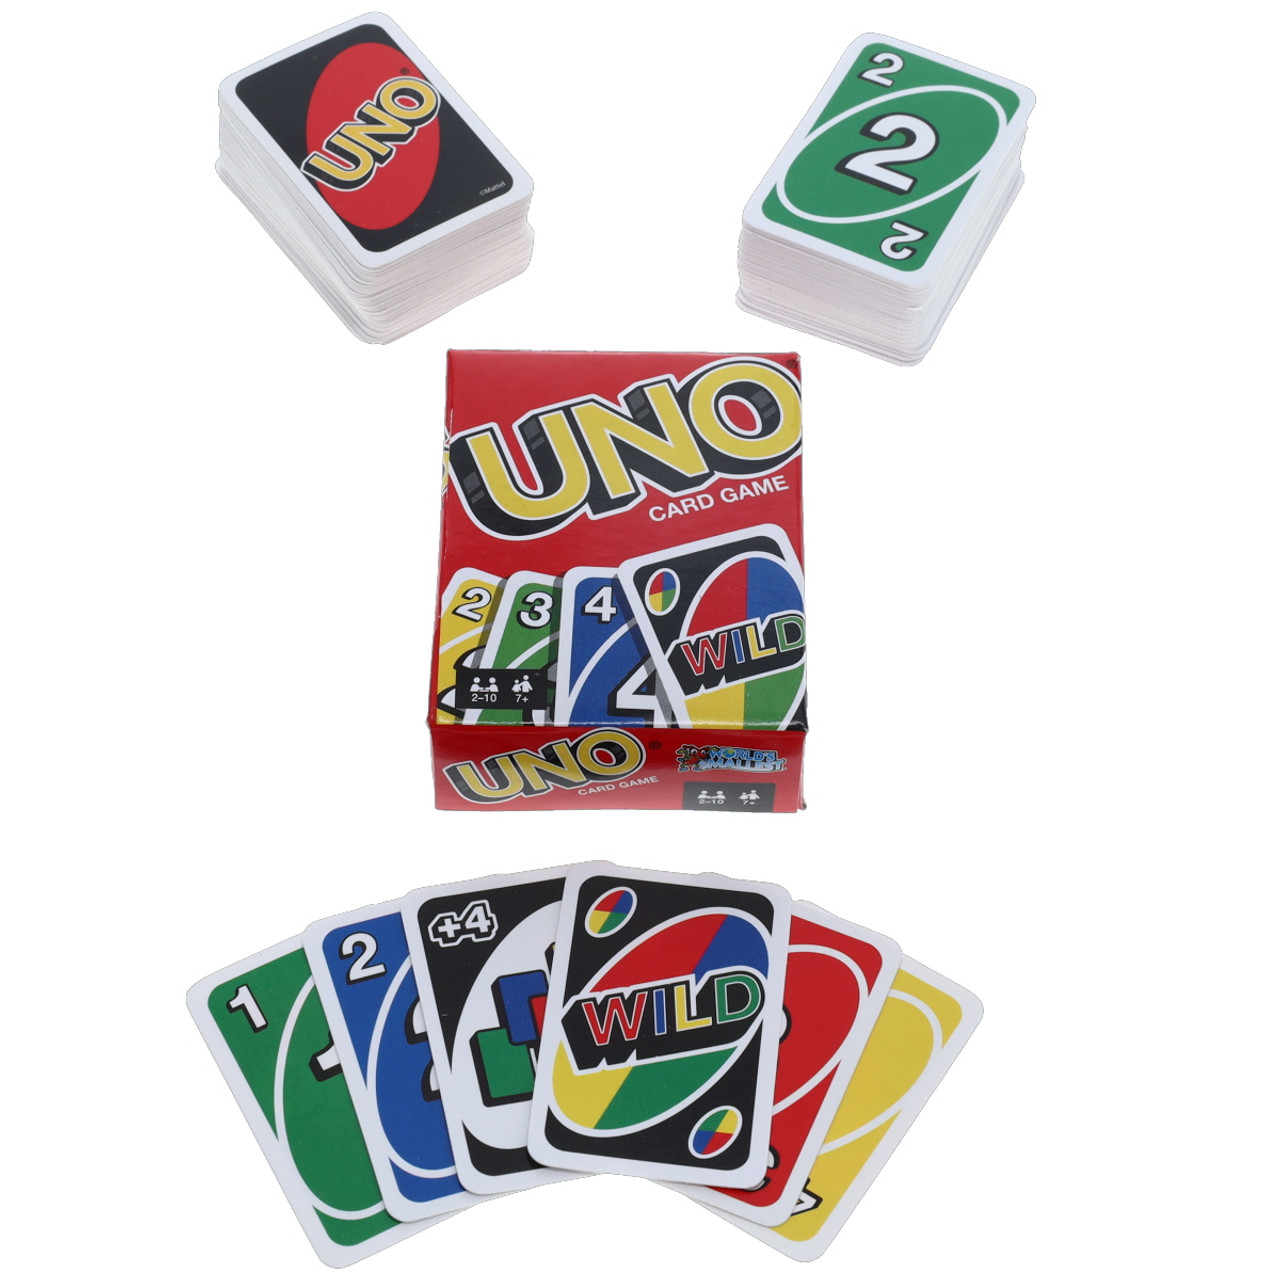 WORLDS SMALLEST UNO CARDS